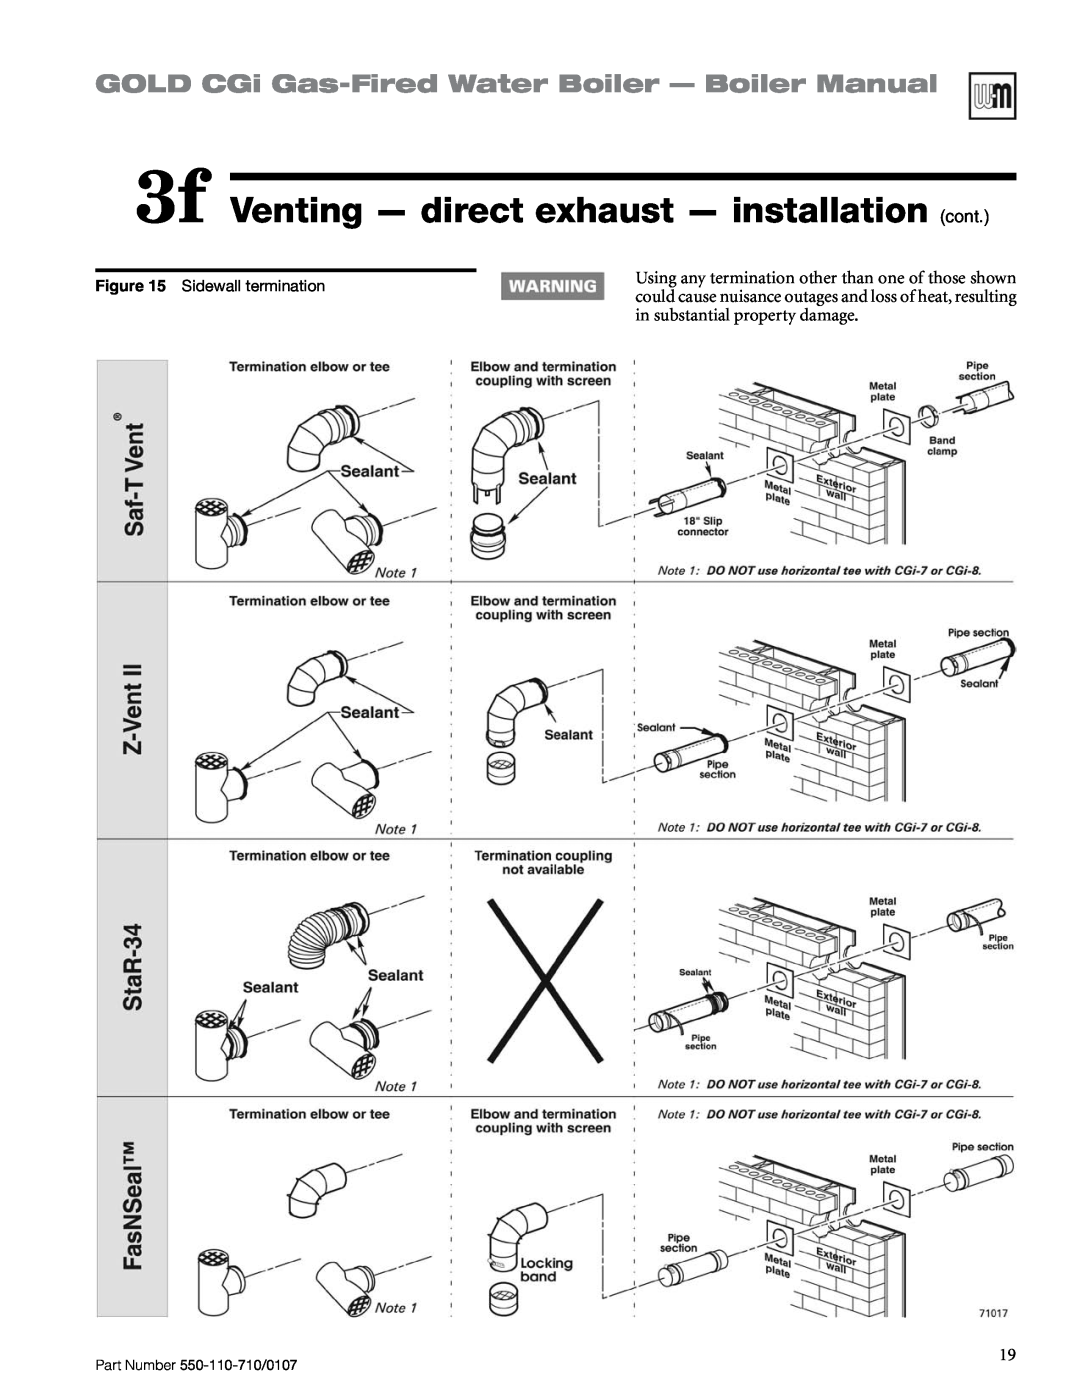 Weil-McLain Series 2 manual 3f Venting — direct exhaust — installation cont, GOLD CGi Gas-FiredWater Boiler — Boiler Manual 